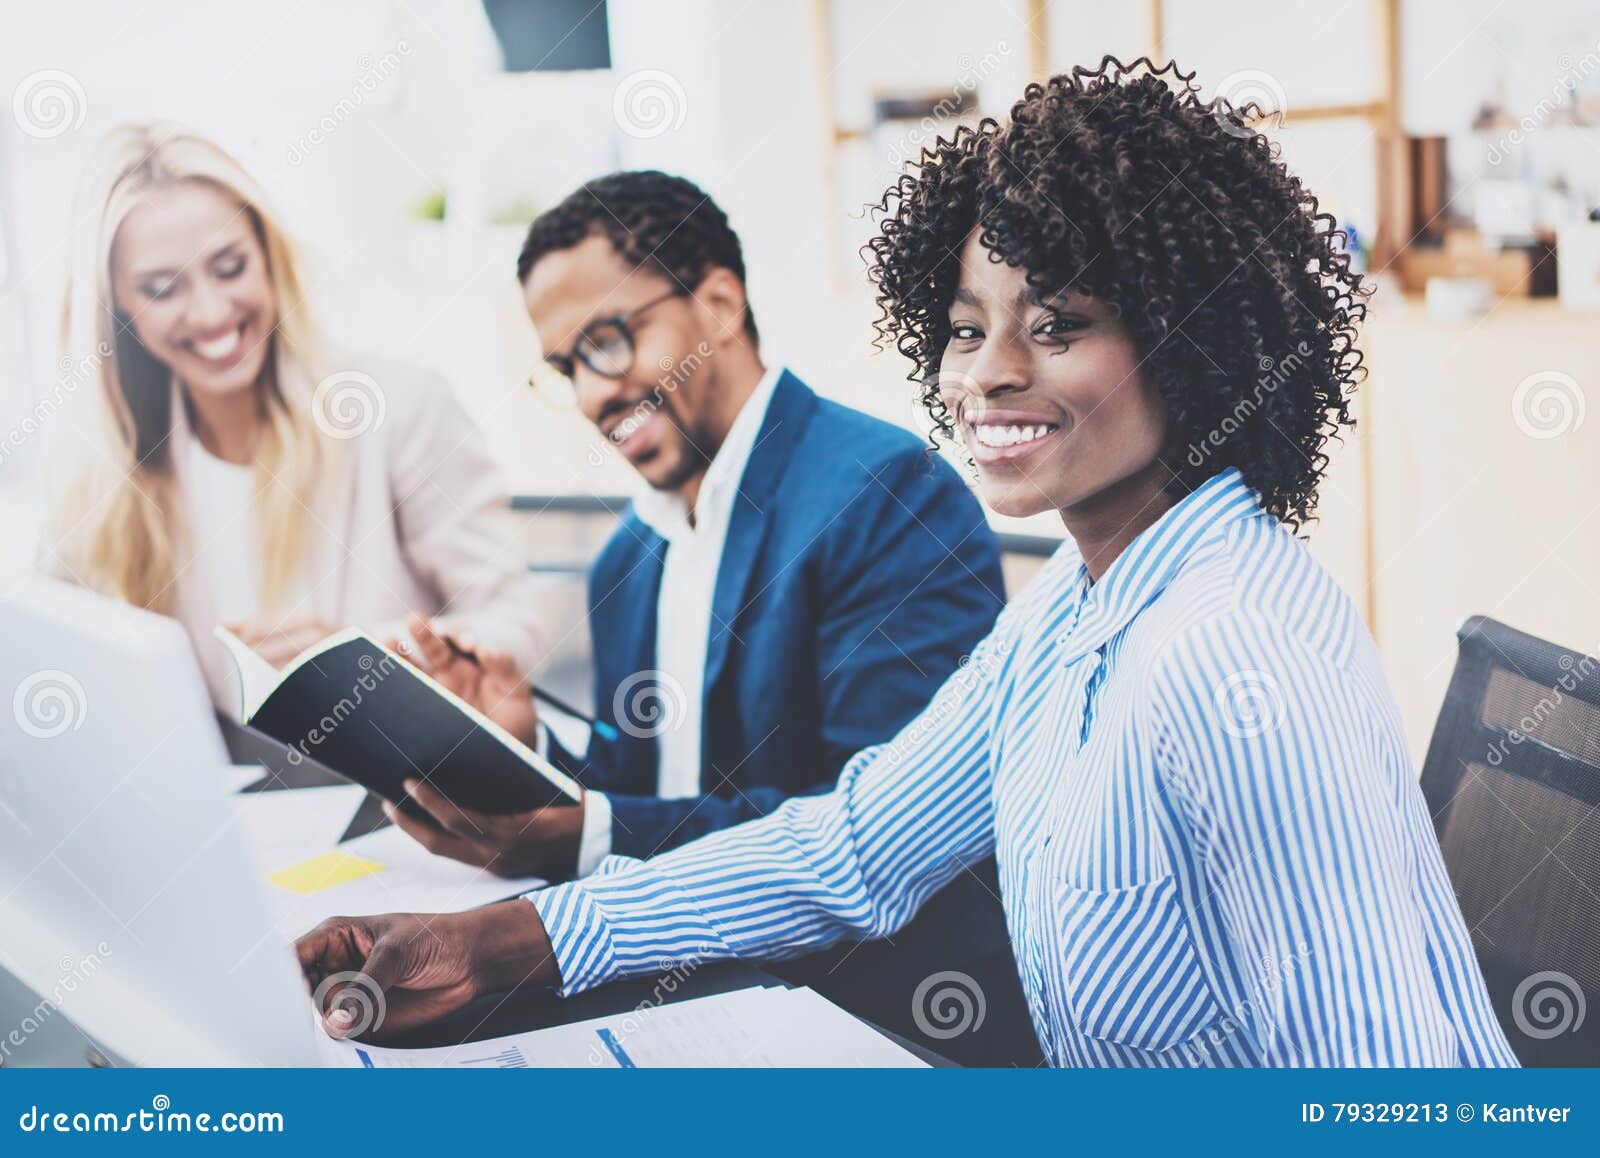 group of three coworkers working together on business project in modern office.young attractive african woman smiling, teamwork co